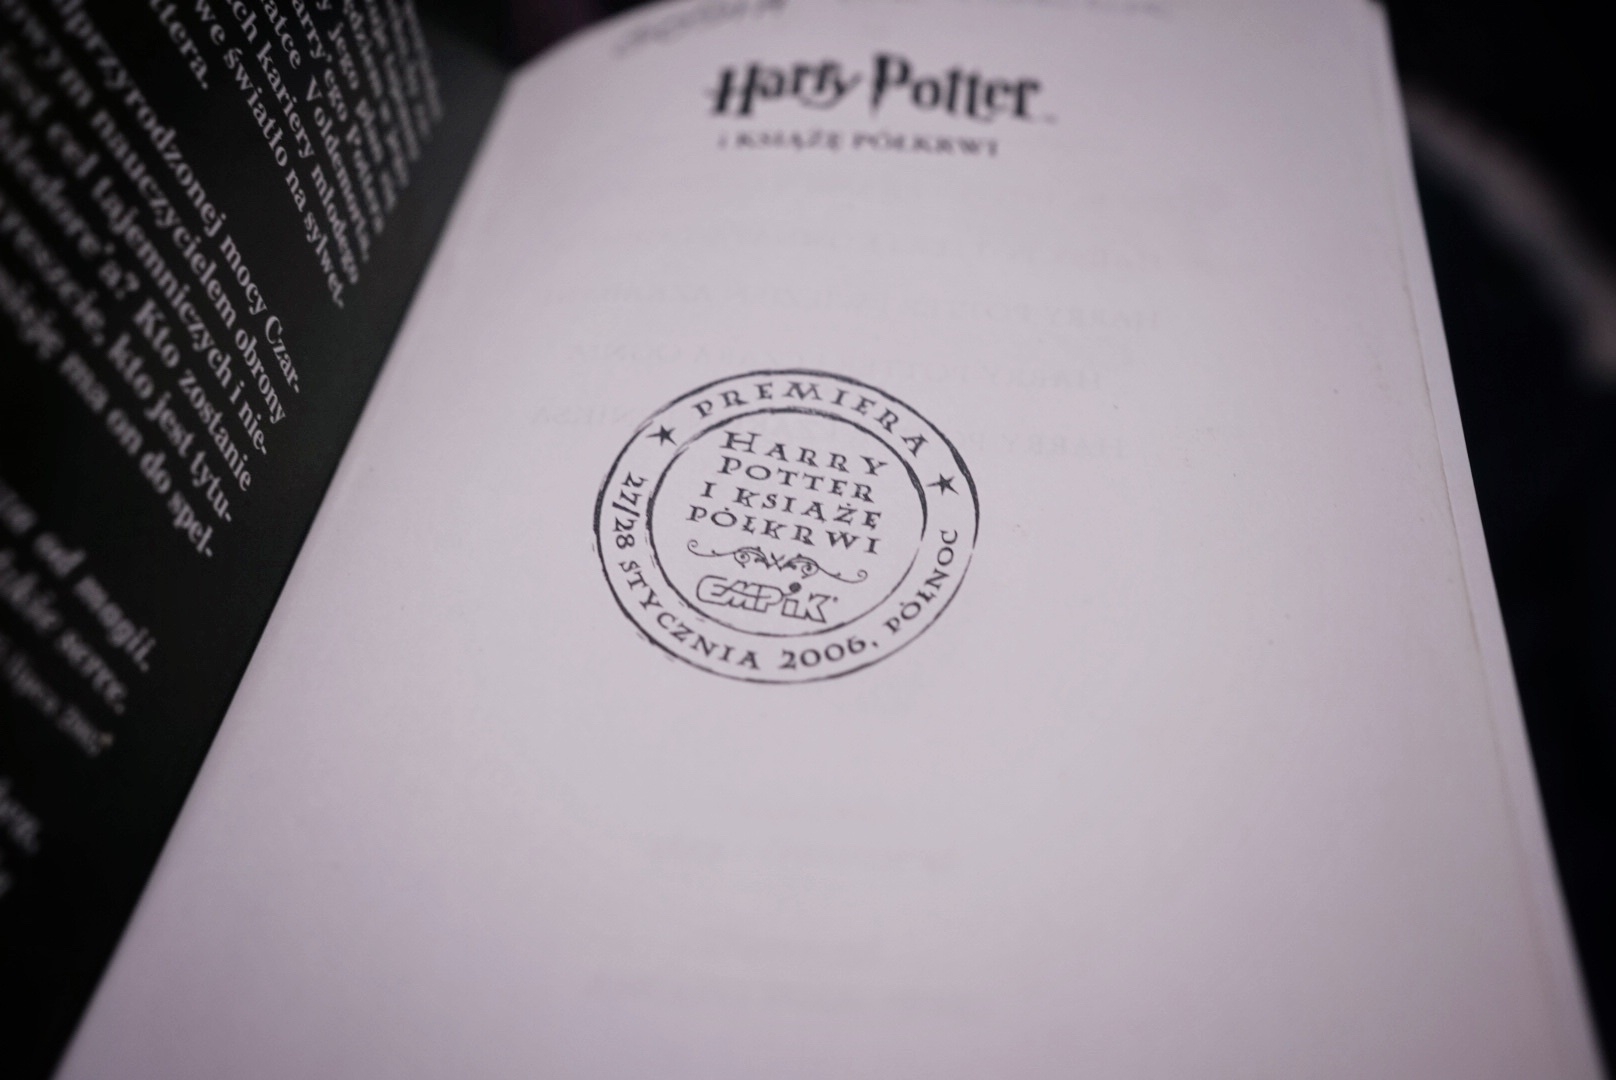 first page in the book Harry Potter and the Half-Blood Prince with a stamp from the Polish premiere of the book in Poland, 2006